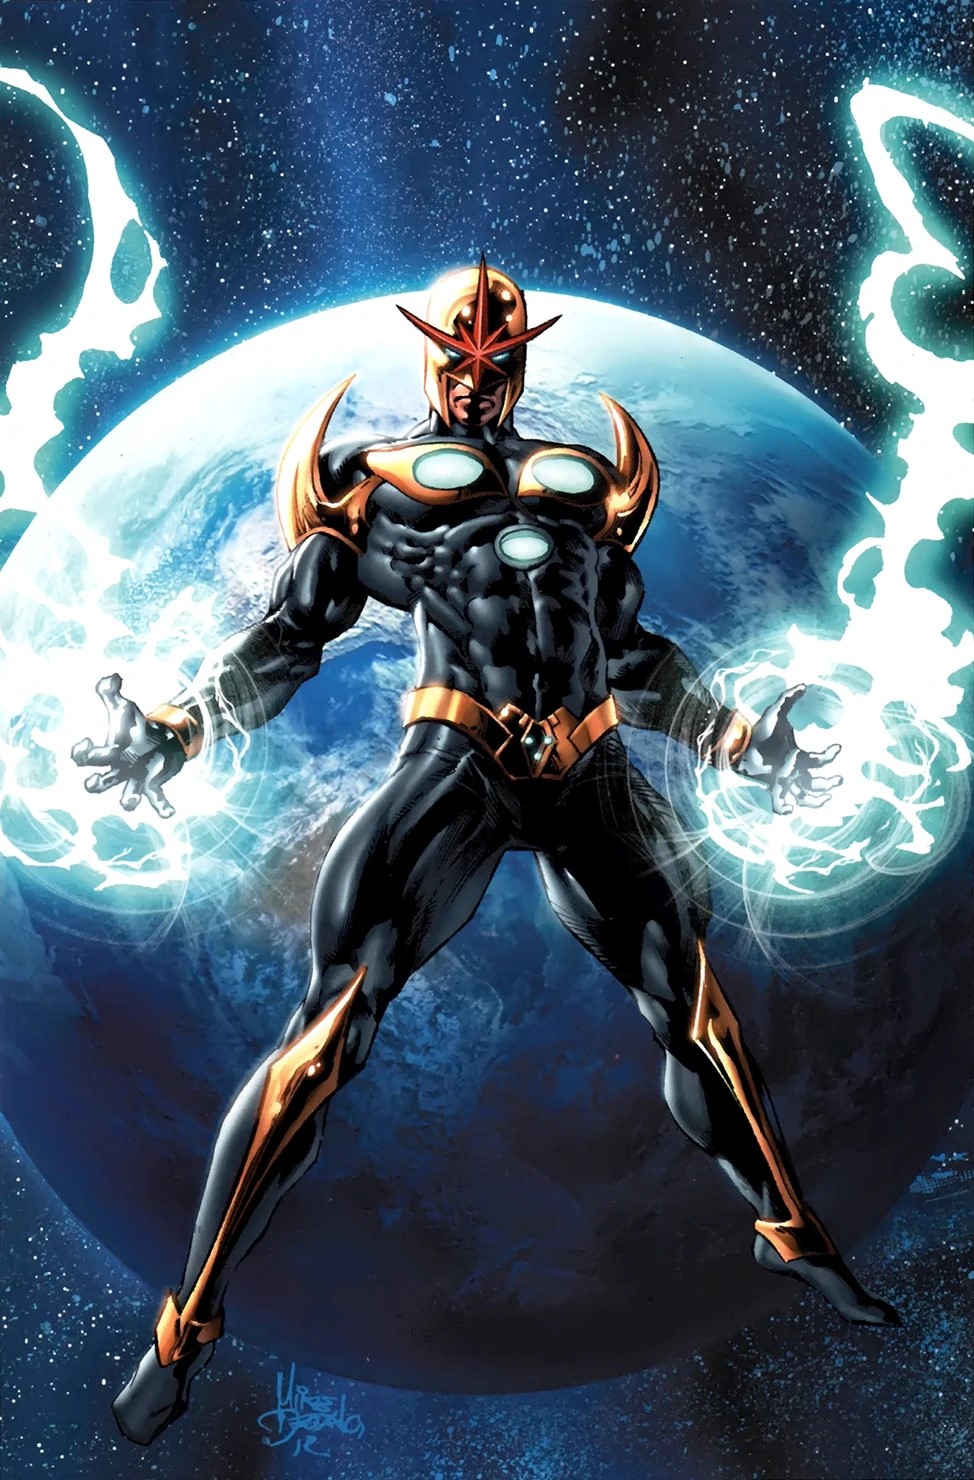 Richard Rider is Nova in Marvel Comics. Marvel Studios are developing a NOVA project for the MCU